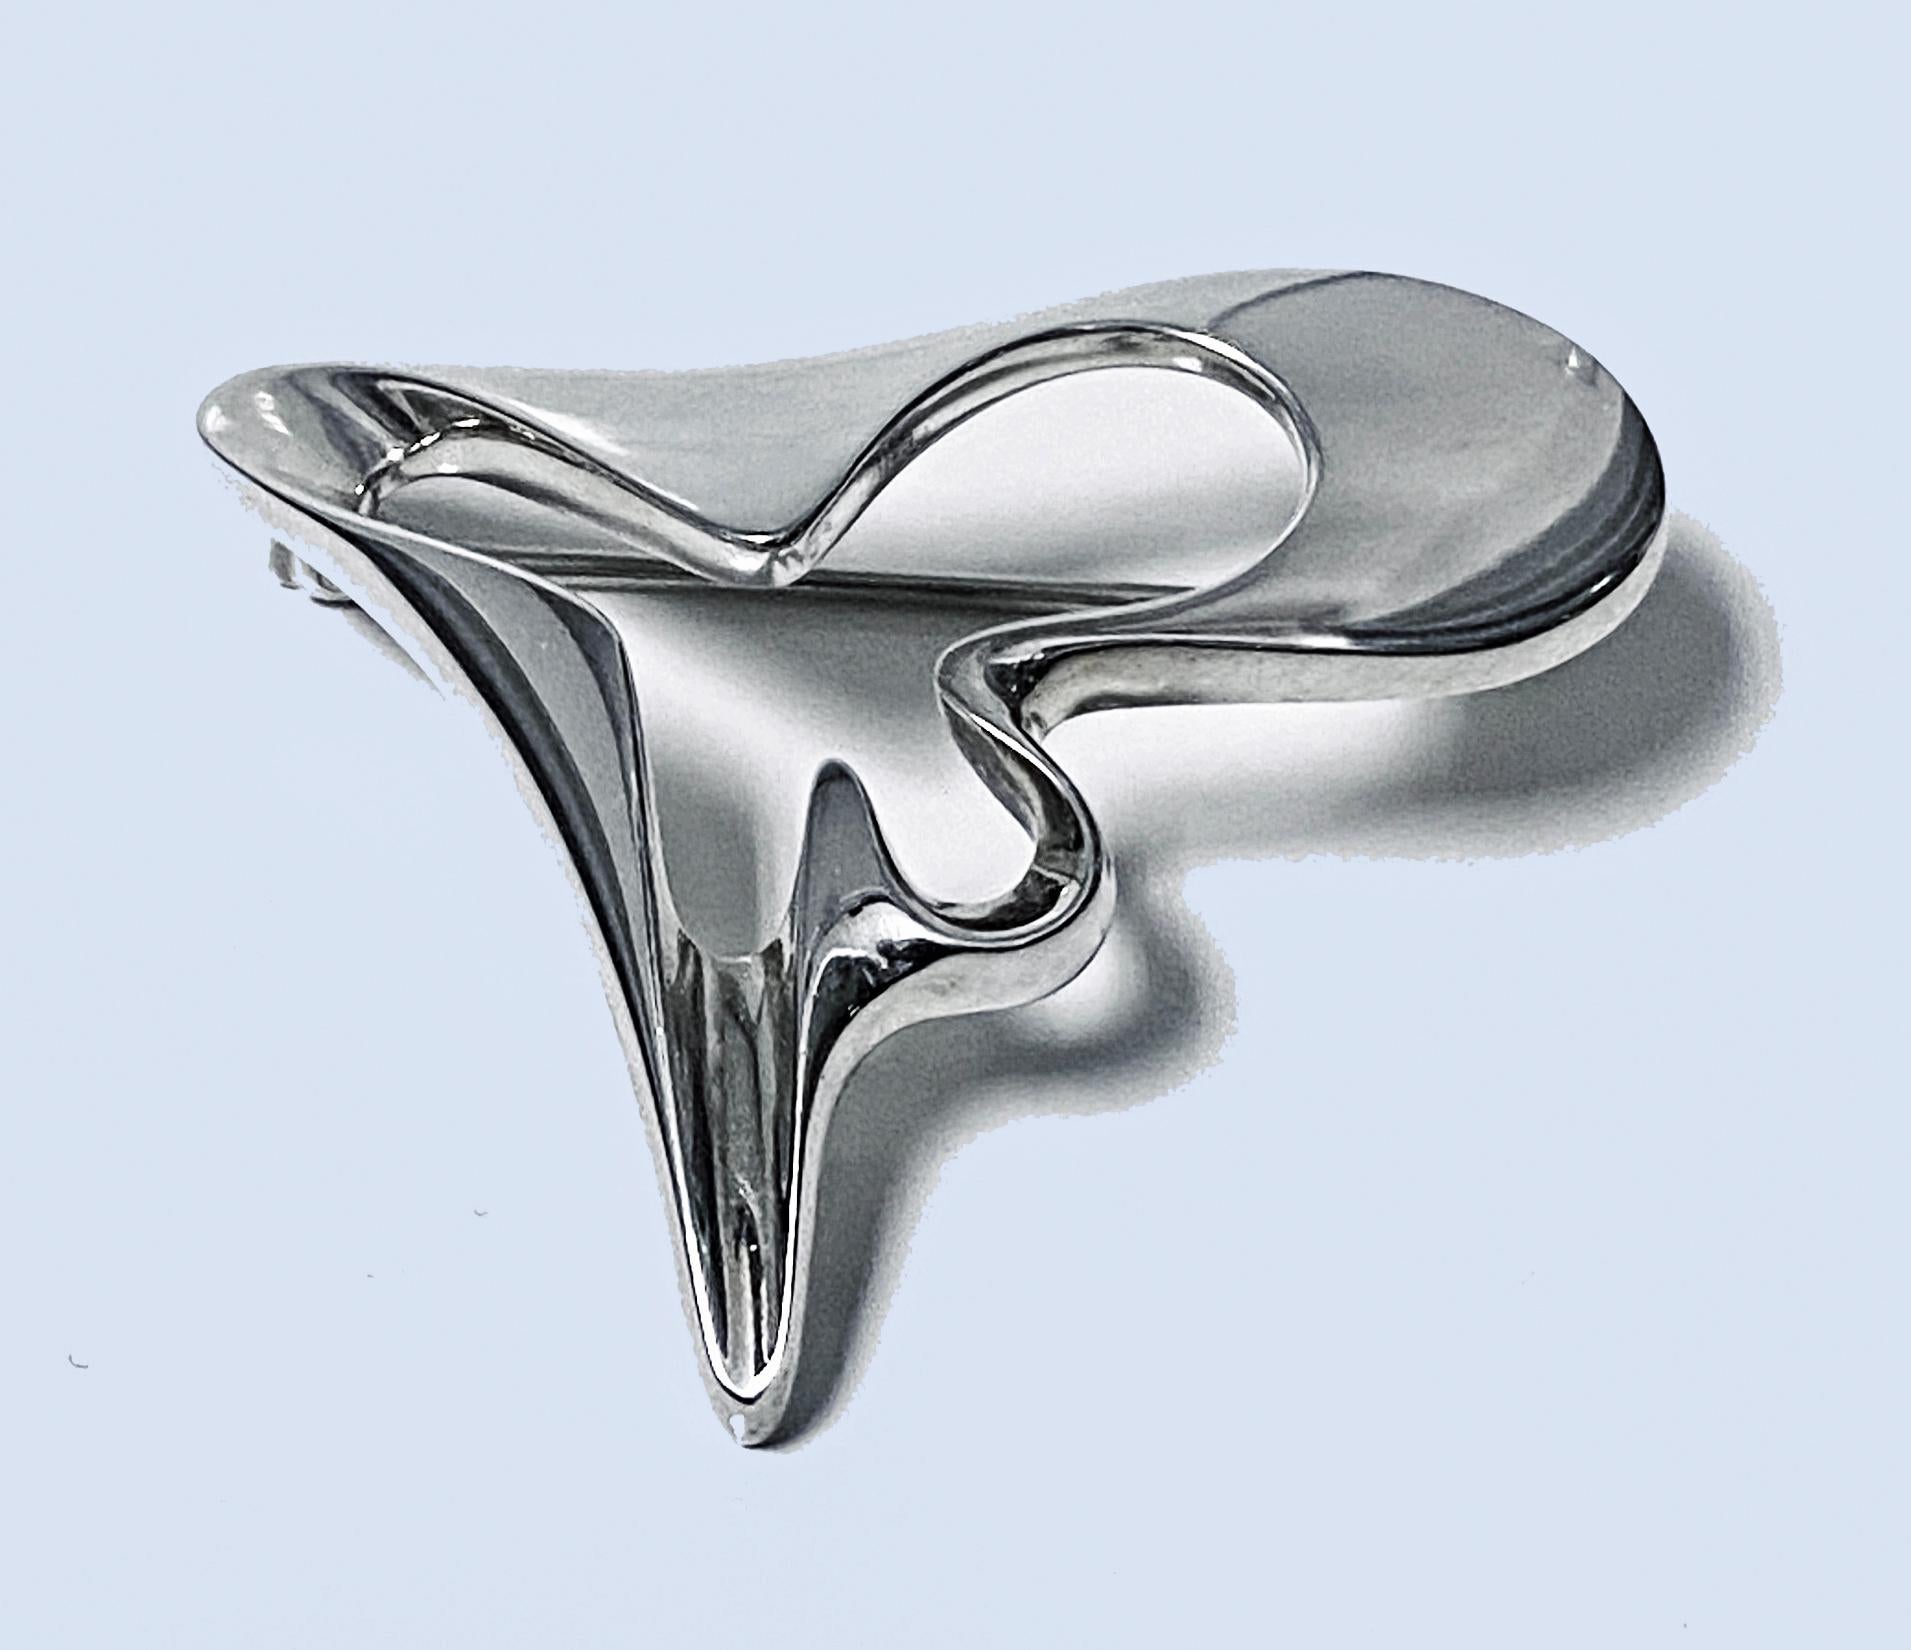 Georg Jensen Sterling Silver brooch, design #324 by Henning Koppel. Mid-Century C.1960. Measures 1.75 x 1.50 inches. Weight:12.11 grams. Full Georg Jensen marks to reverse and design number 324.